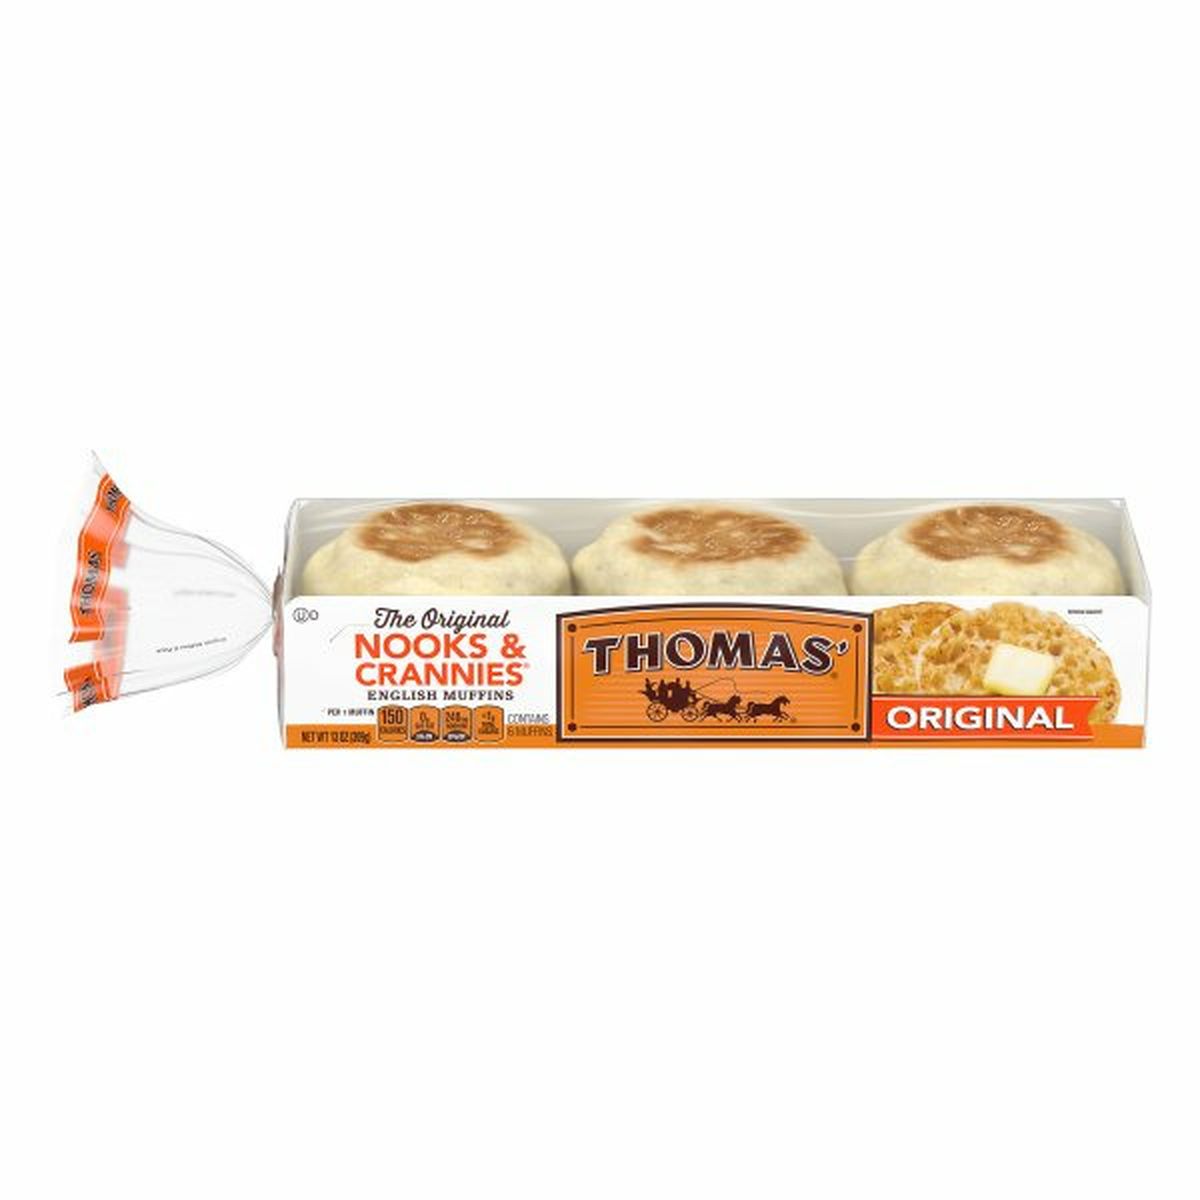 Calories in Thomasâ€™ English Muffins, The Original